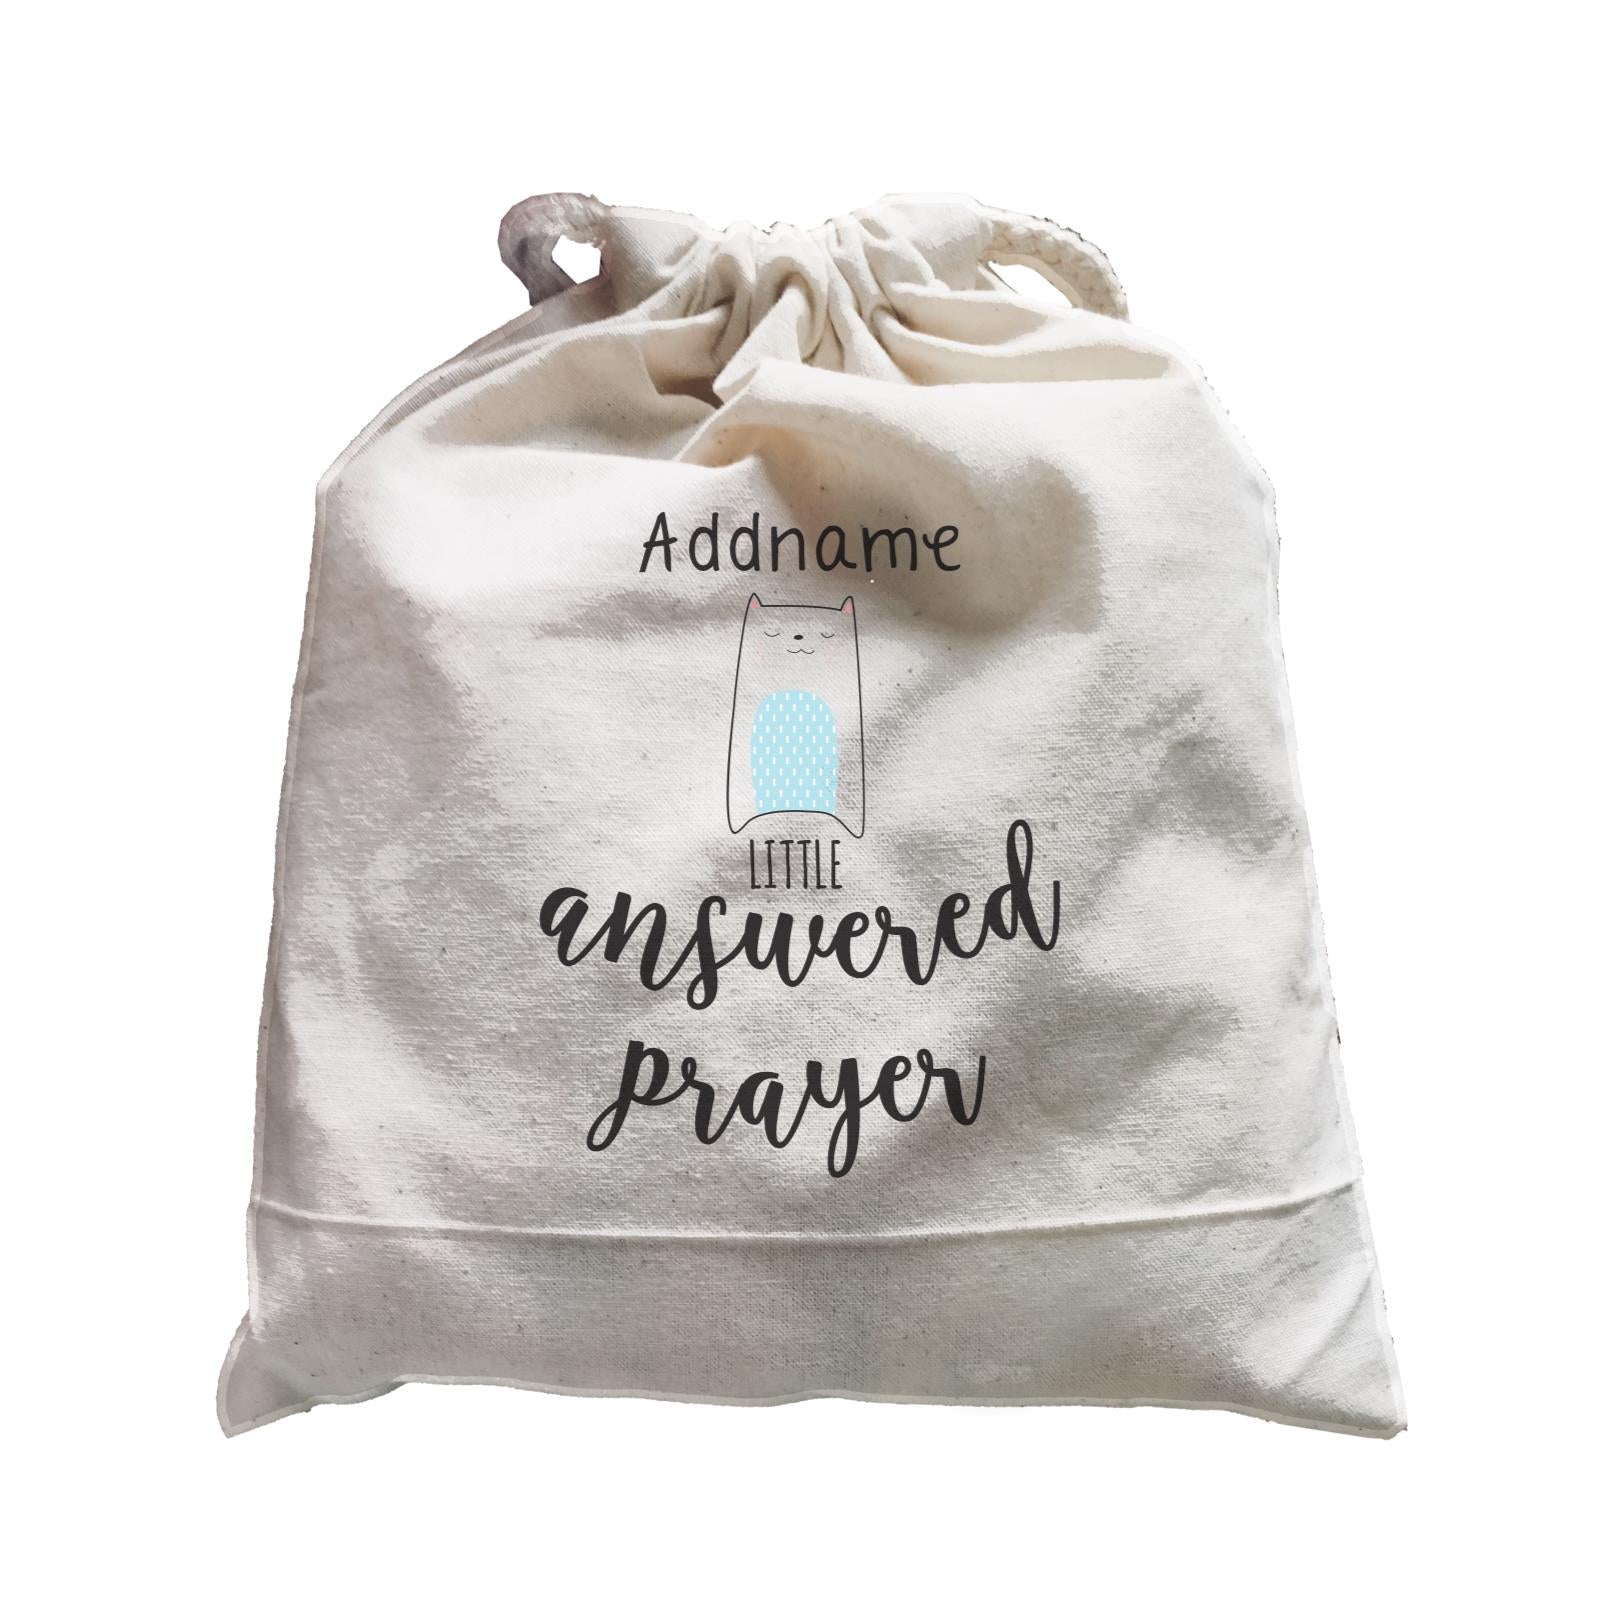 Cute Animals and Friends Series 2 Cat Addname Little Answered Prayer Satchel